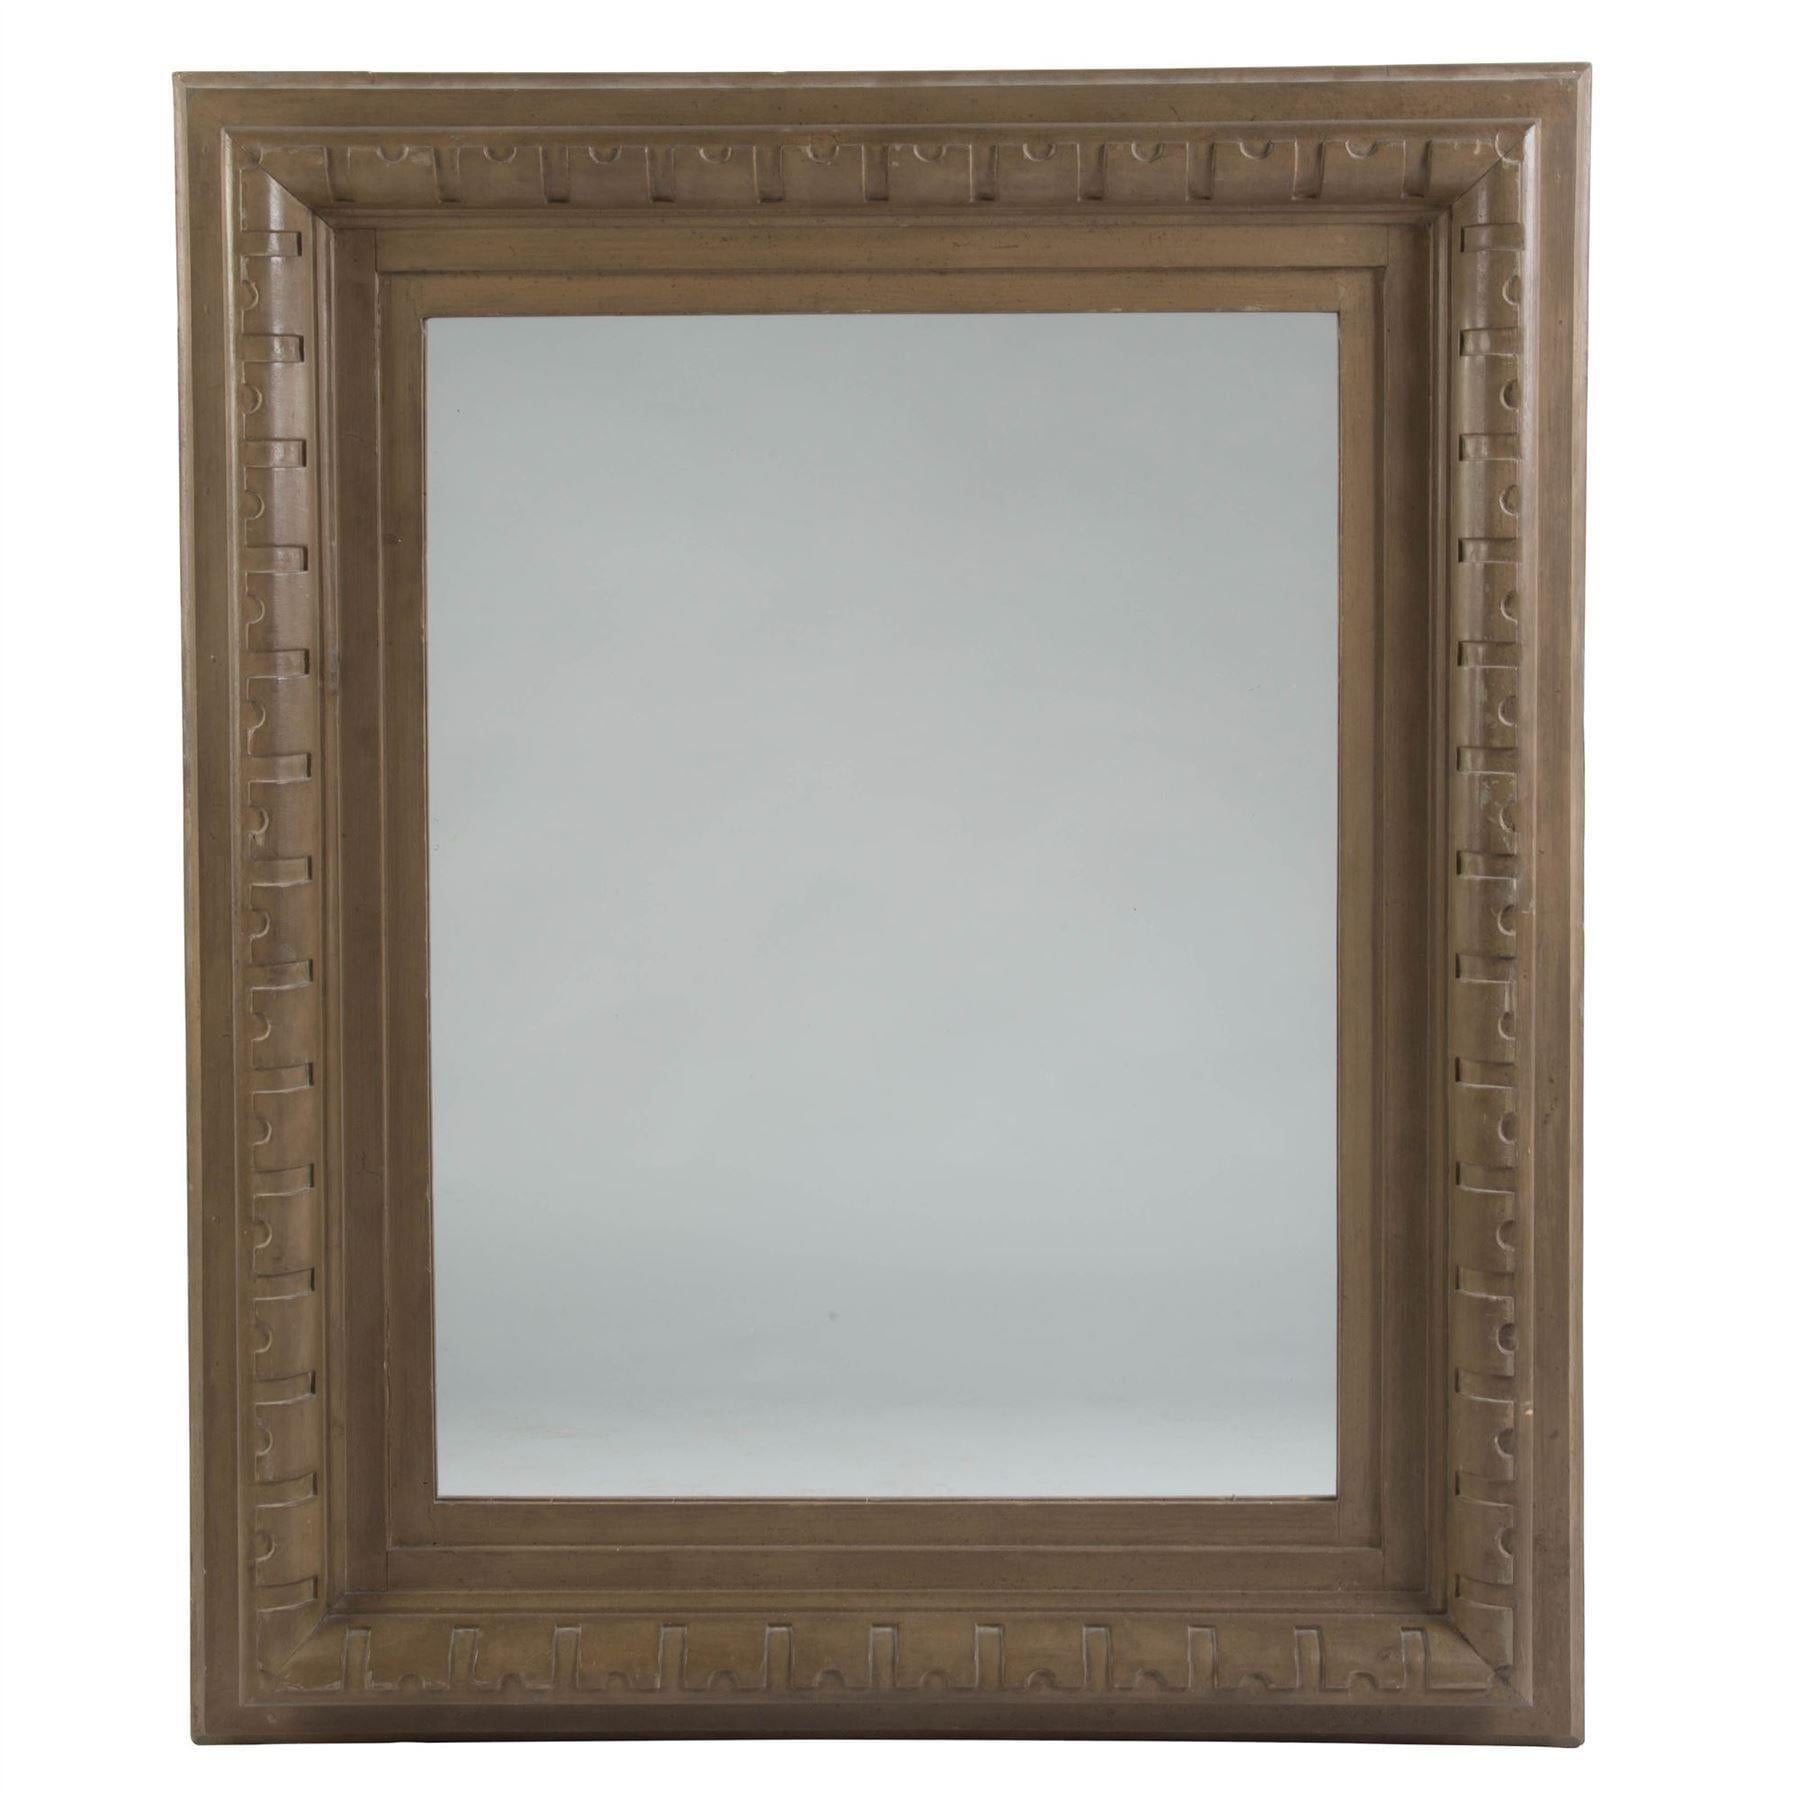 A pair of large architectural wooden framed mirrors with original paint wash color, French, circa 1940.